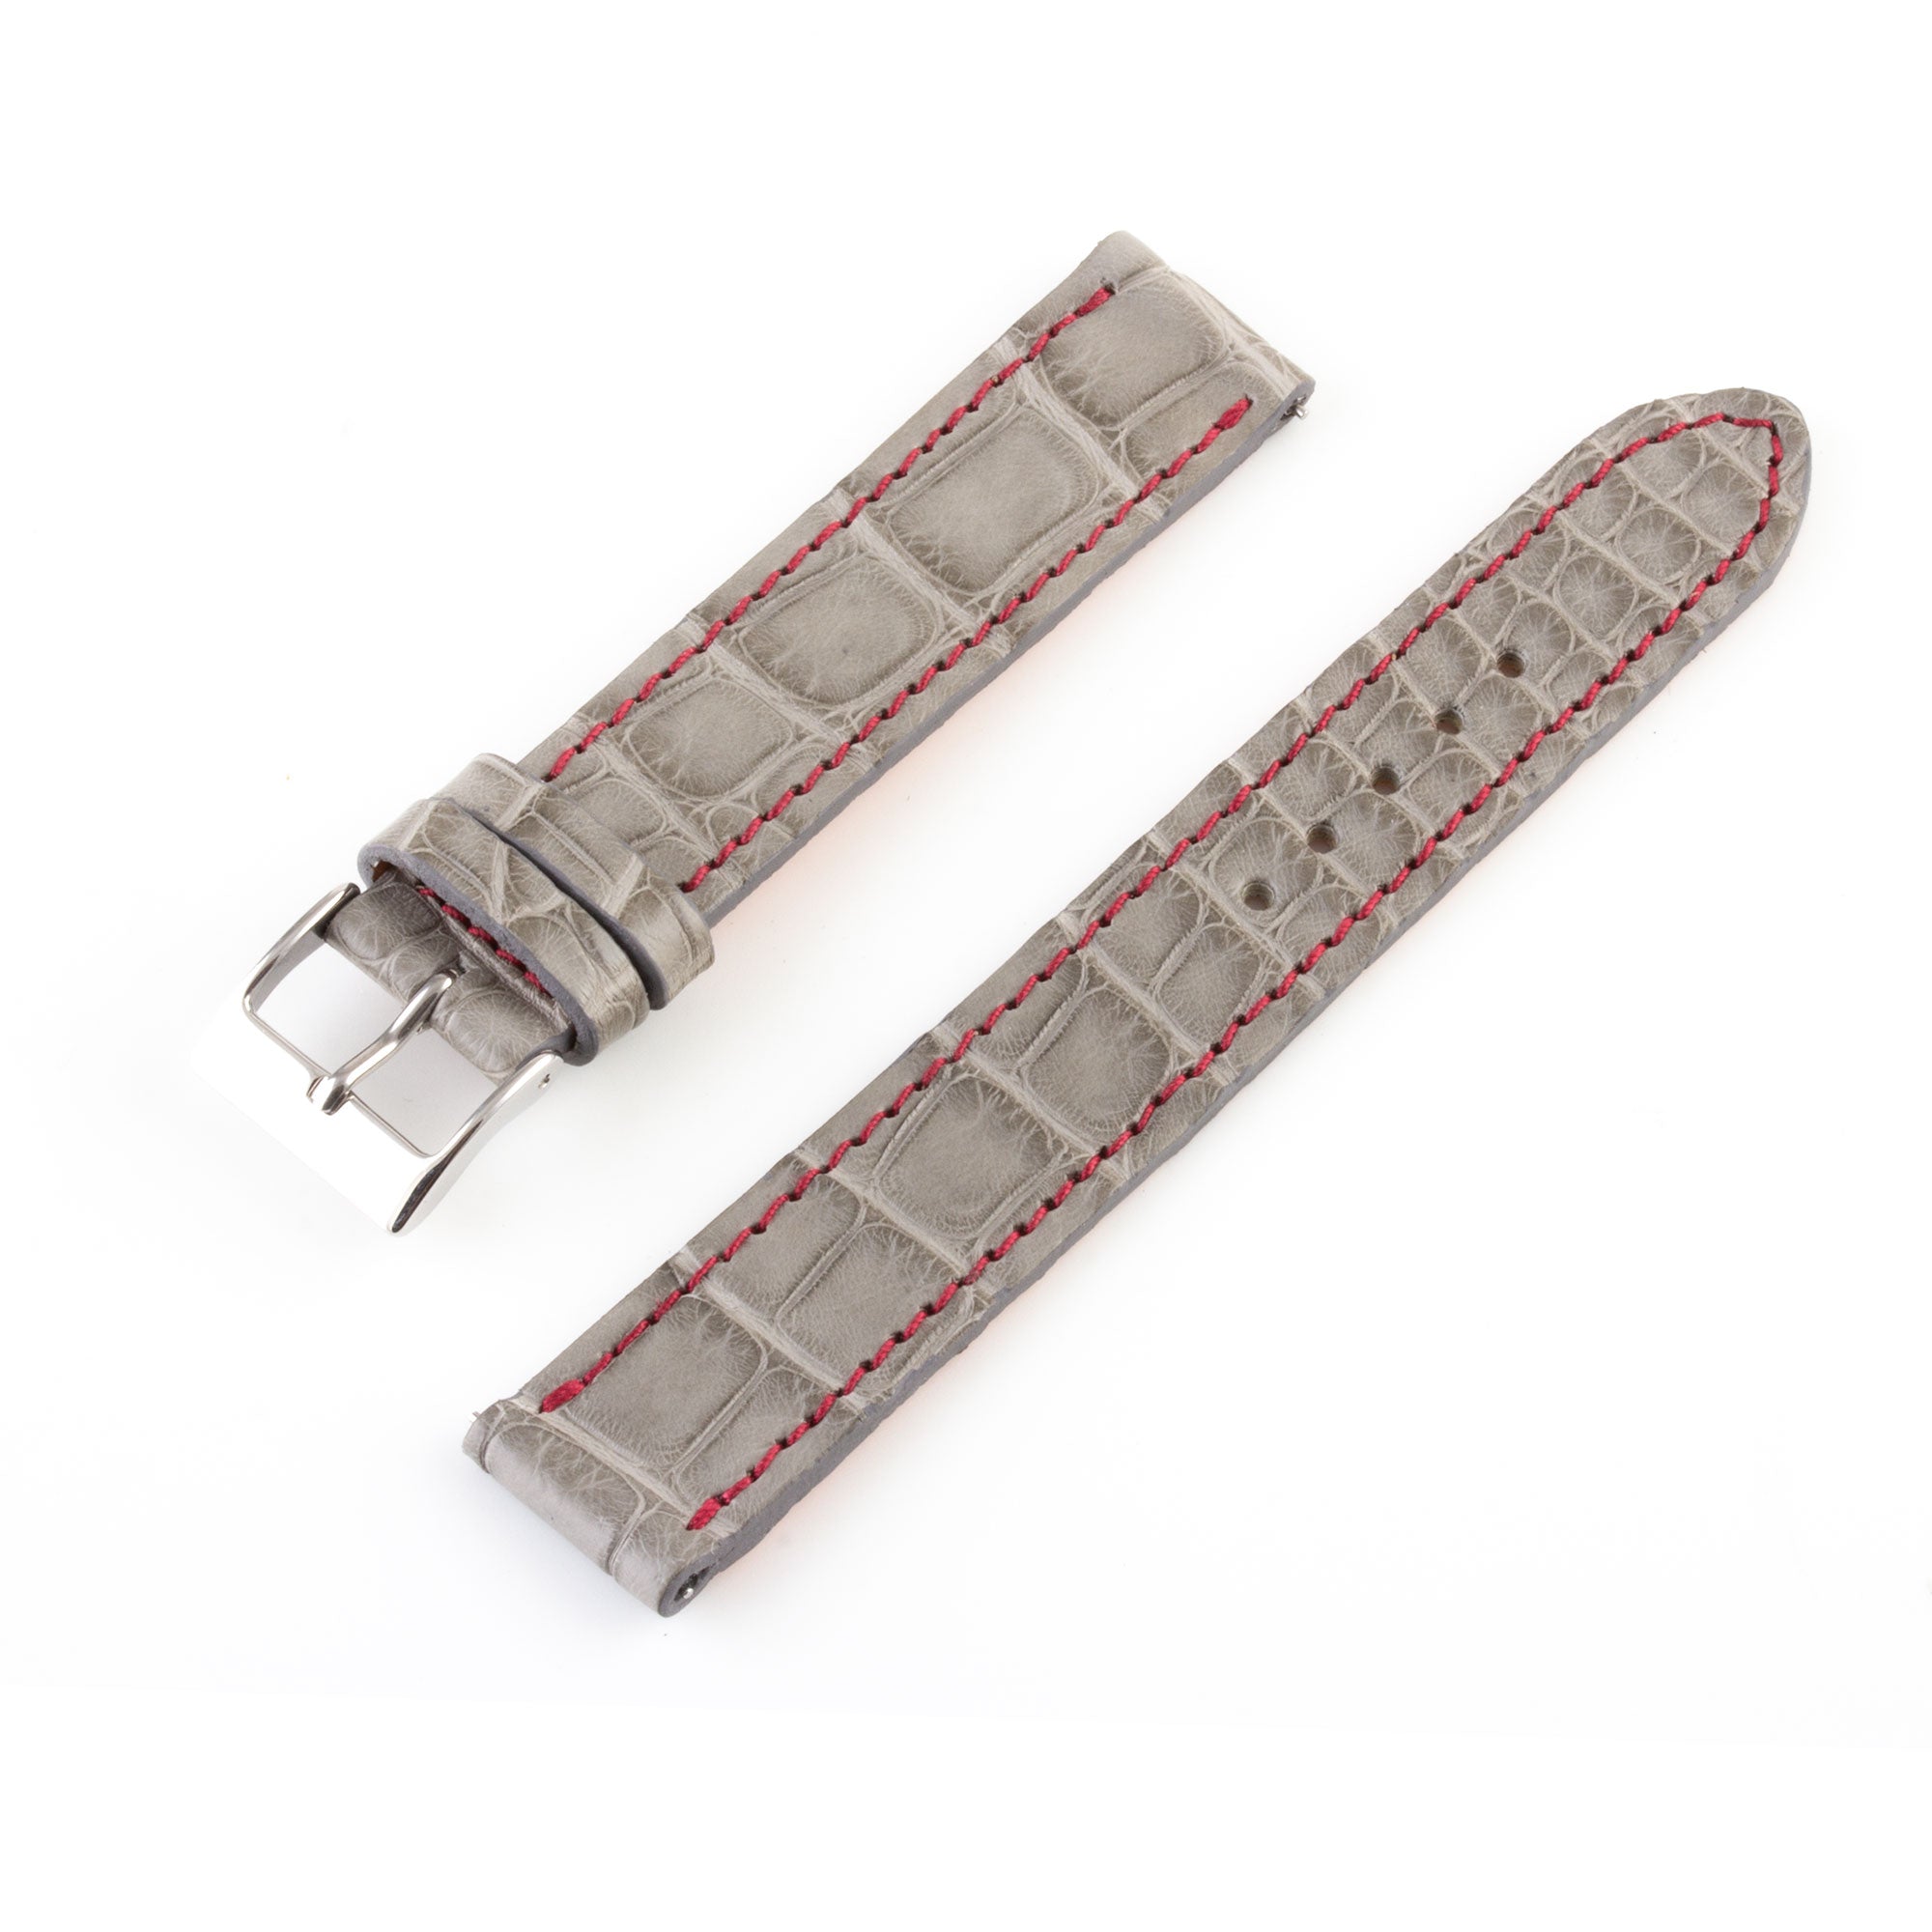 Alligator "Solo" leather watch band - 17mm width (0.67 inches) / Size M (n° 10)